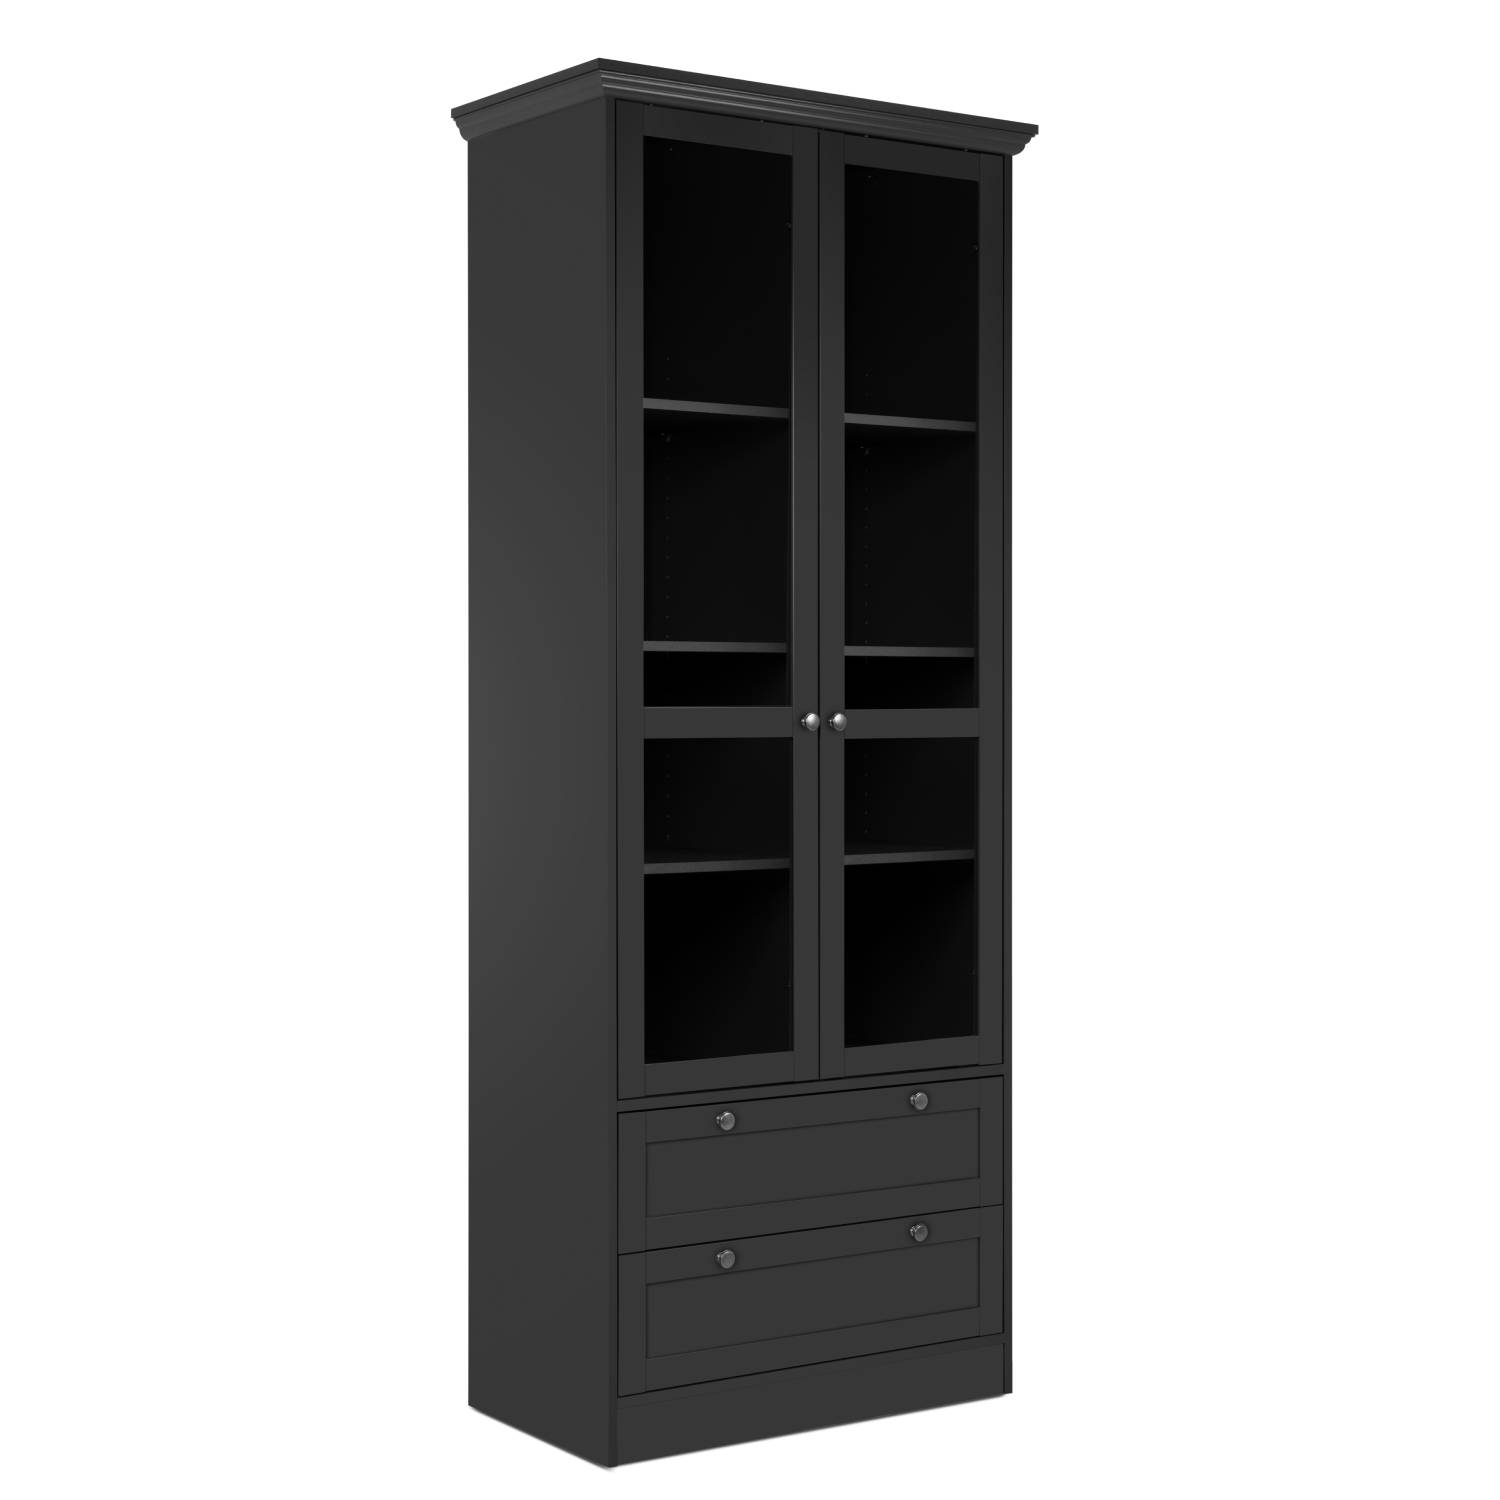 Showcase Highboard Anthracite Cabinet with compartments Living room cabinet Wood